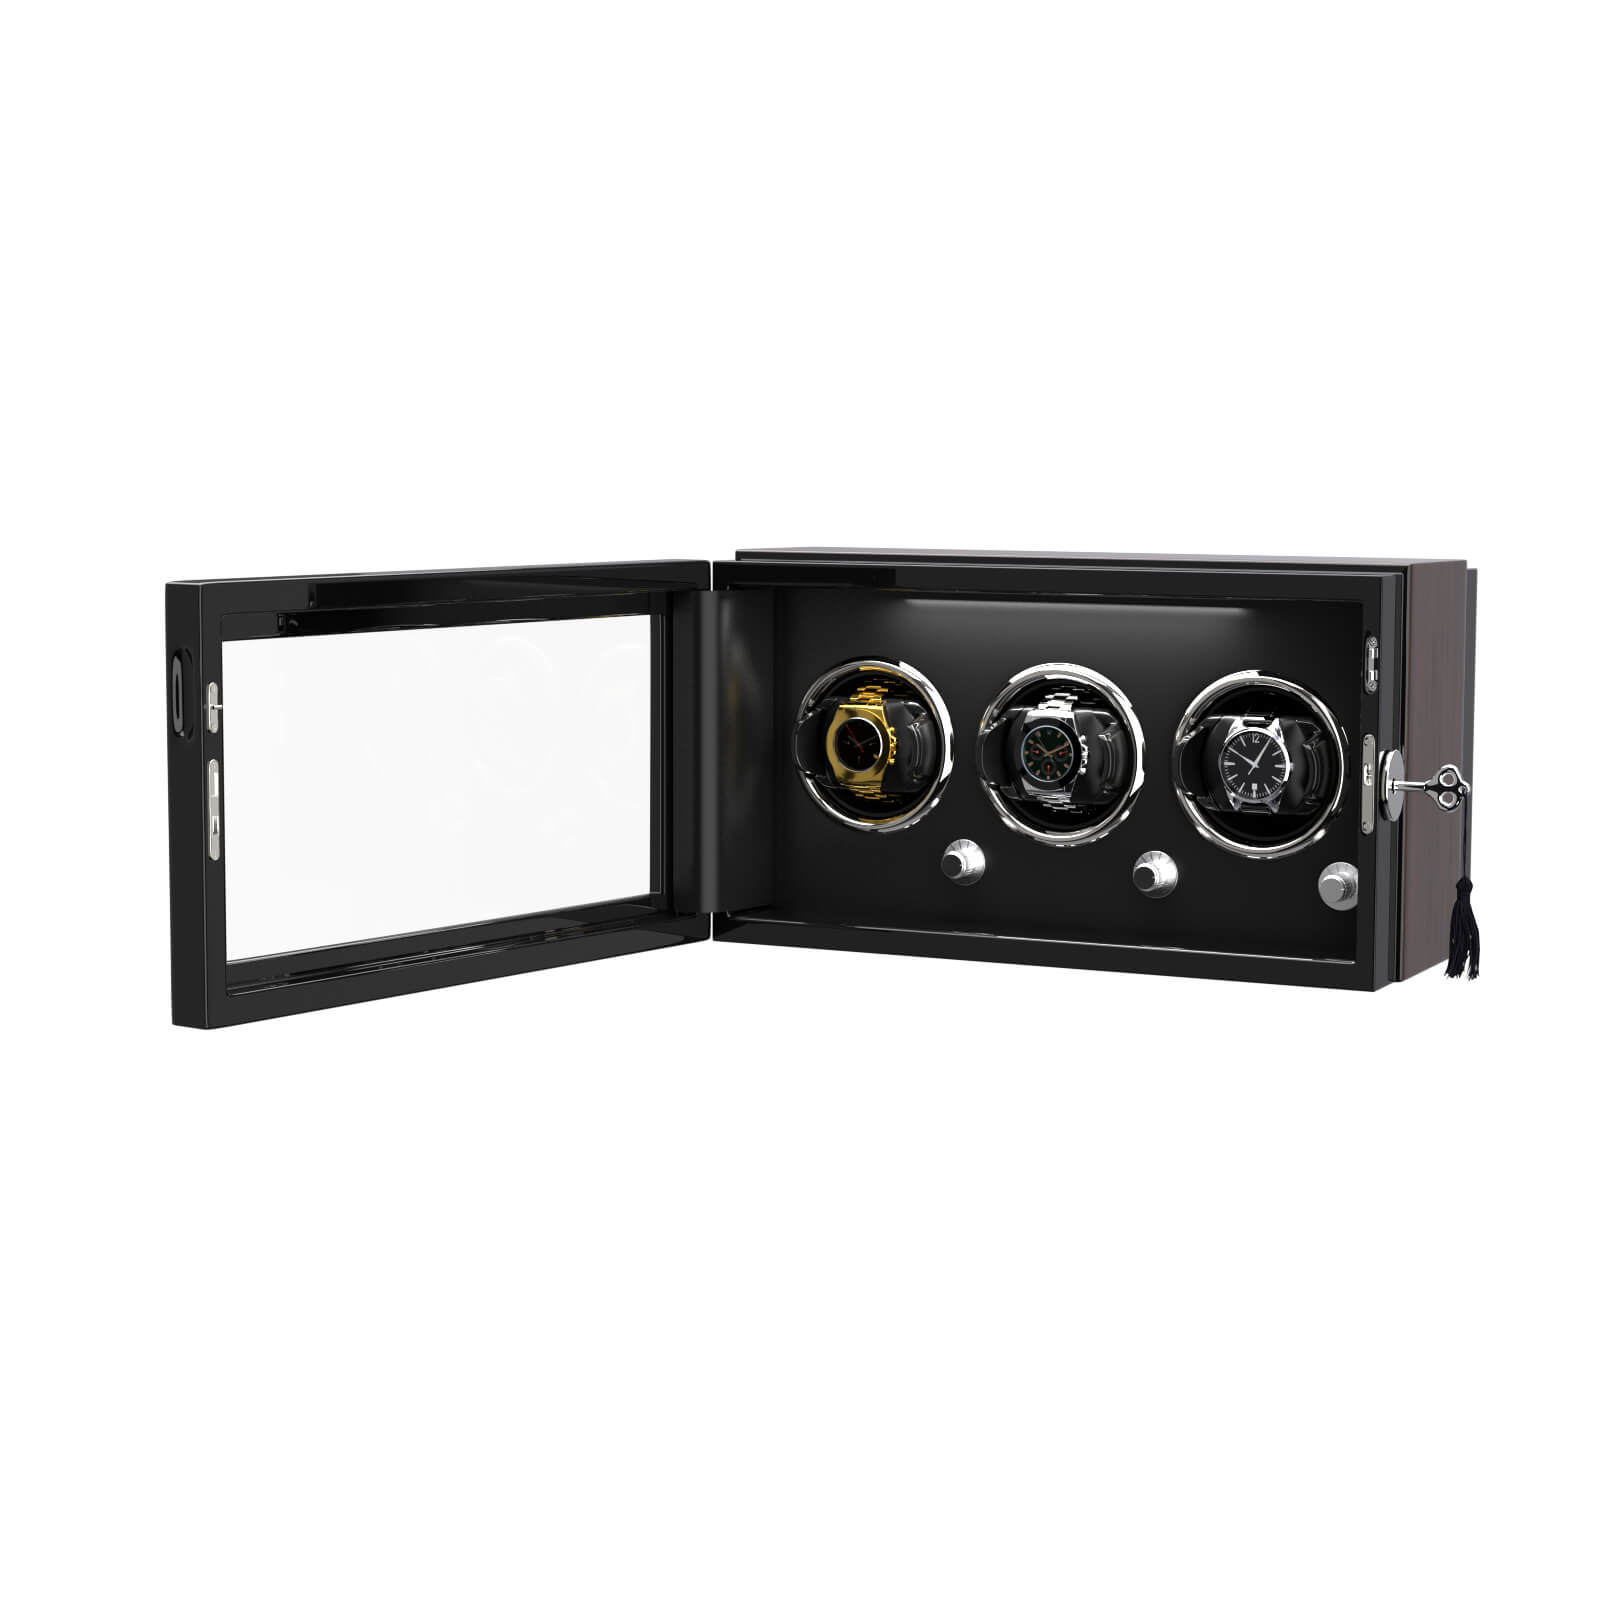 3 Watch Winder for Automatic Watches Quiet Mabuchi Motor with Lock